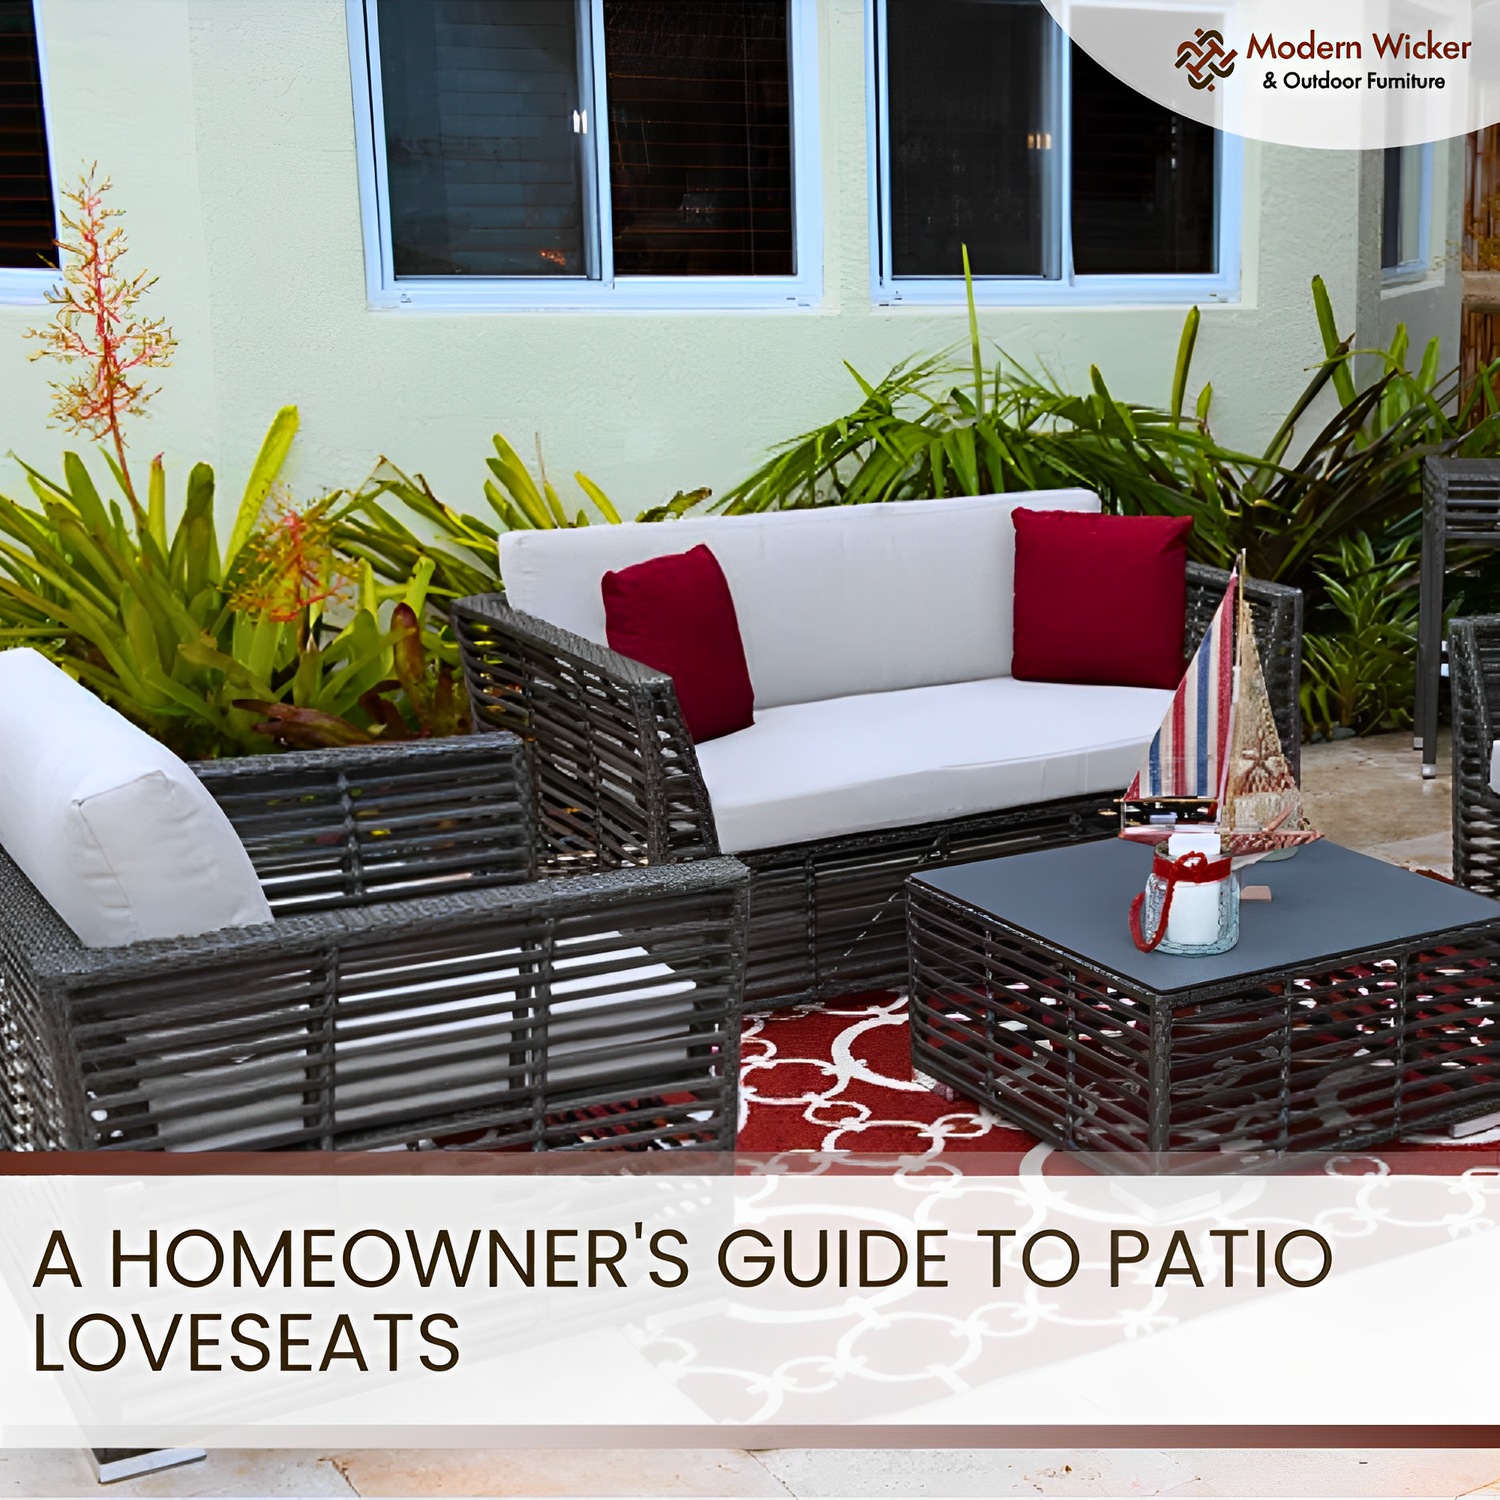 A Homeowner's Guide to Patio Loveseats